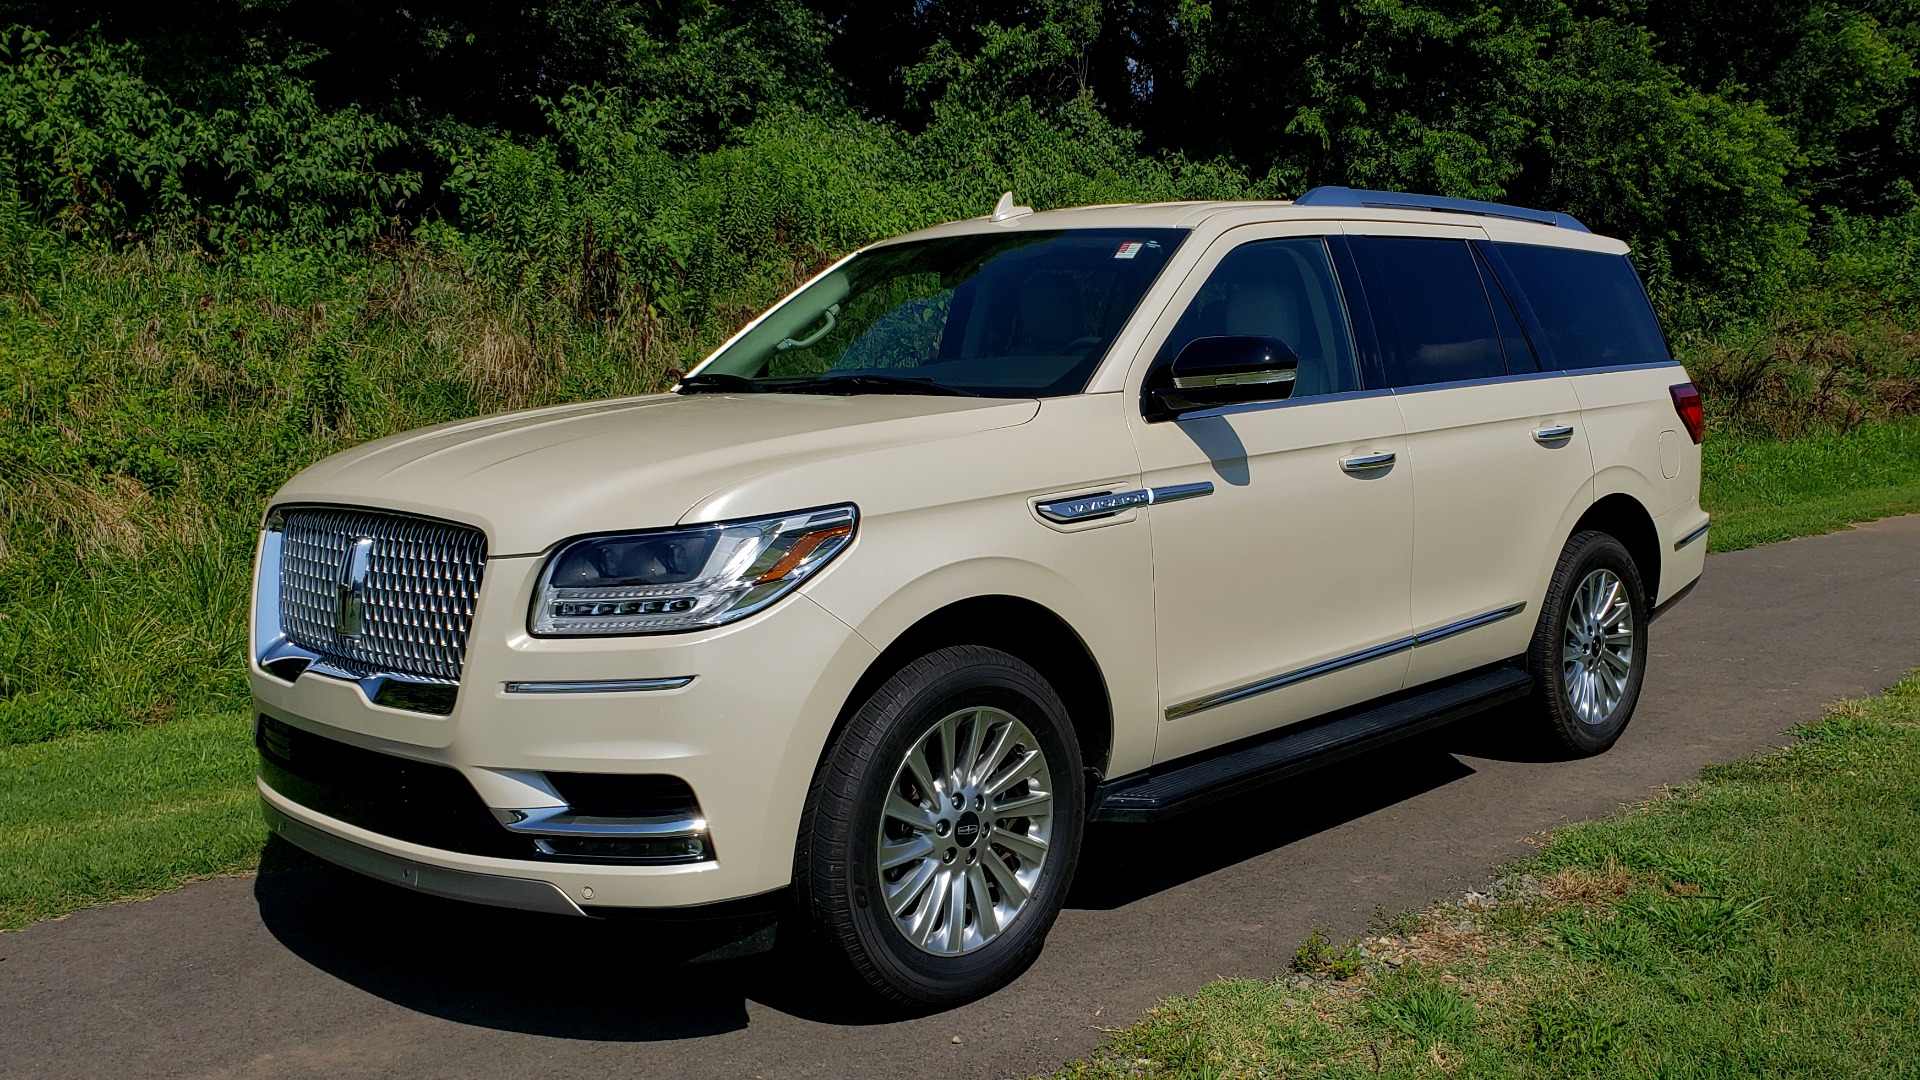 Used 2018 Lincoln NAVIGATOR PREMIERE 4X2 / TWIN-TURBO V6 / NAV / 3-ROW / REARVIEW for sale Sold at Formula Imports in Charlotte NC 28227 2